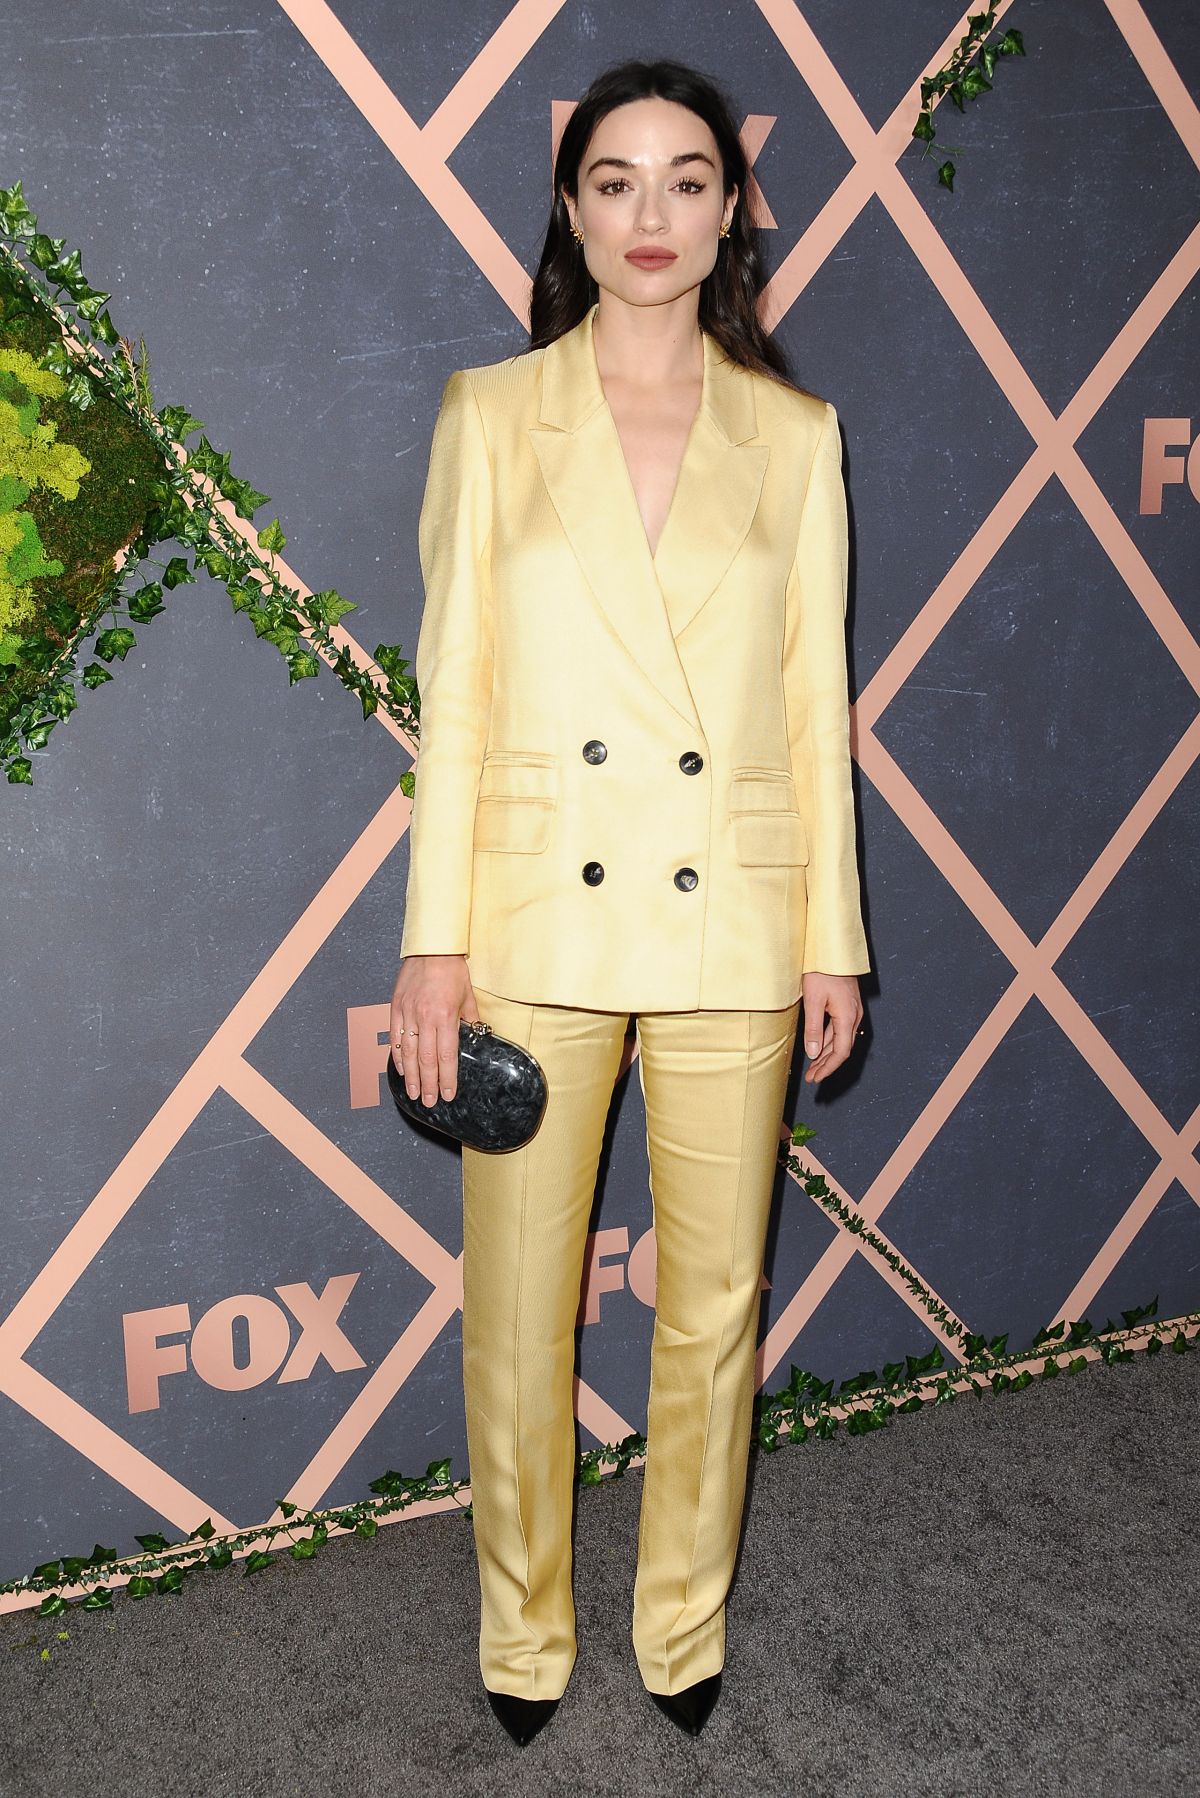 crystal-reed-at-fox-fall-premiere-party-celebration-in-los-angeles-09-25-2017-0.jpg